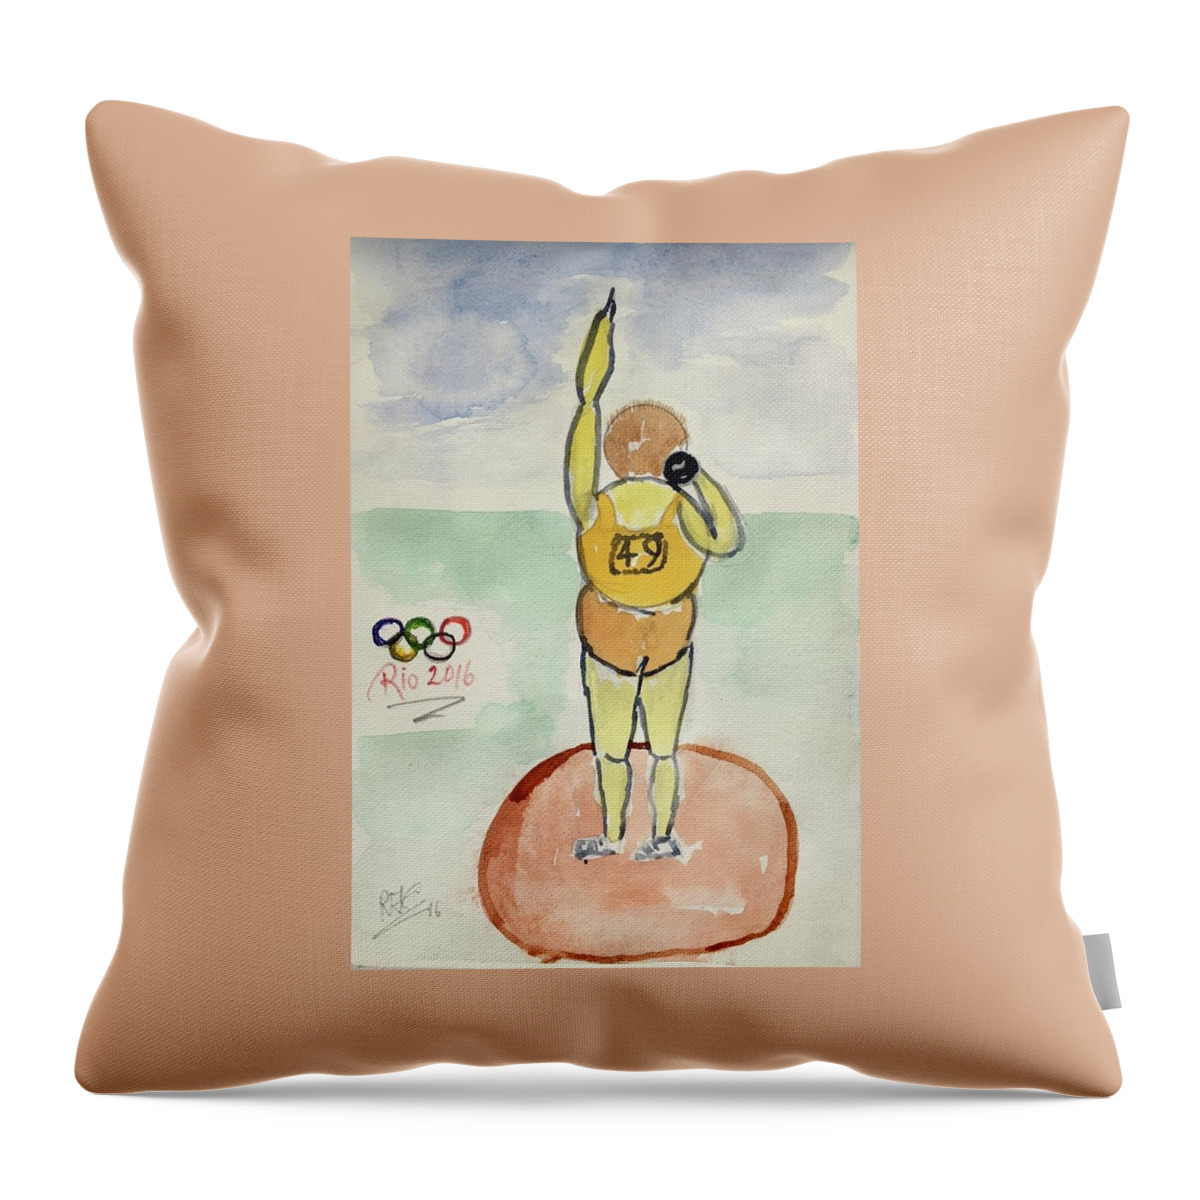 Sketch Throw Pillow featuring the painting Rio2016 - Shot Putt by Roger Cummiskey